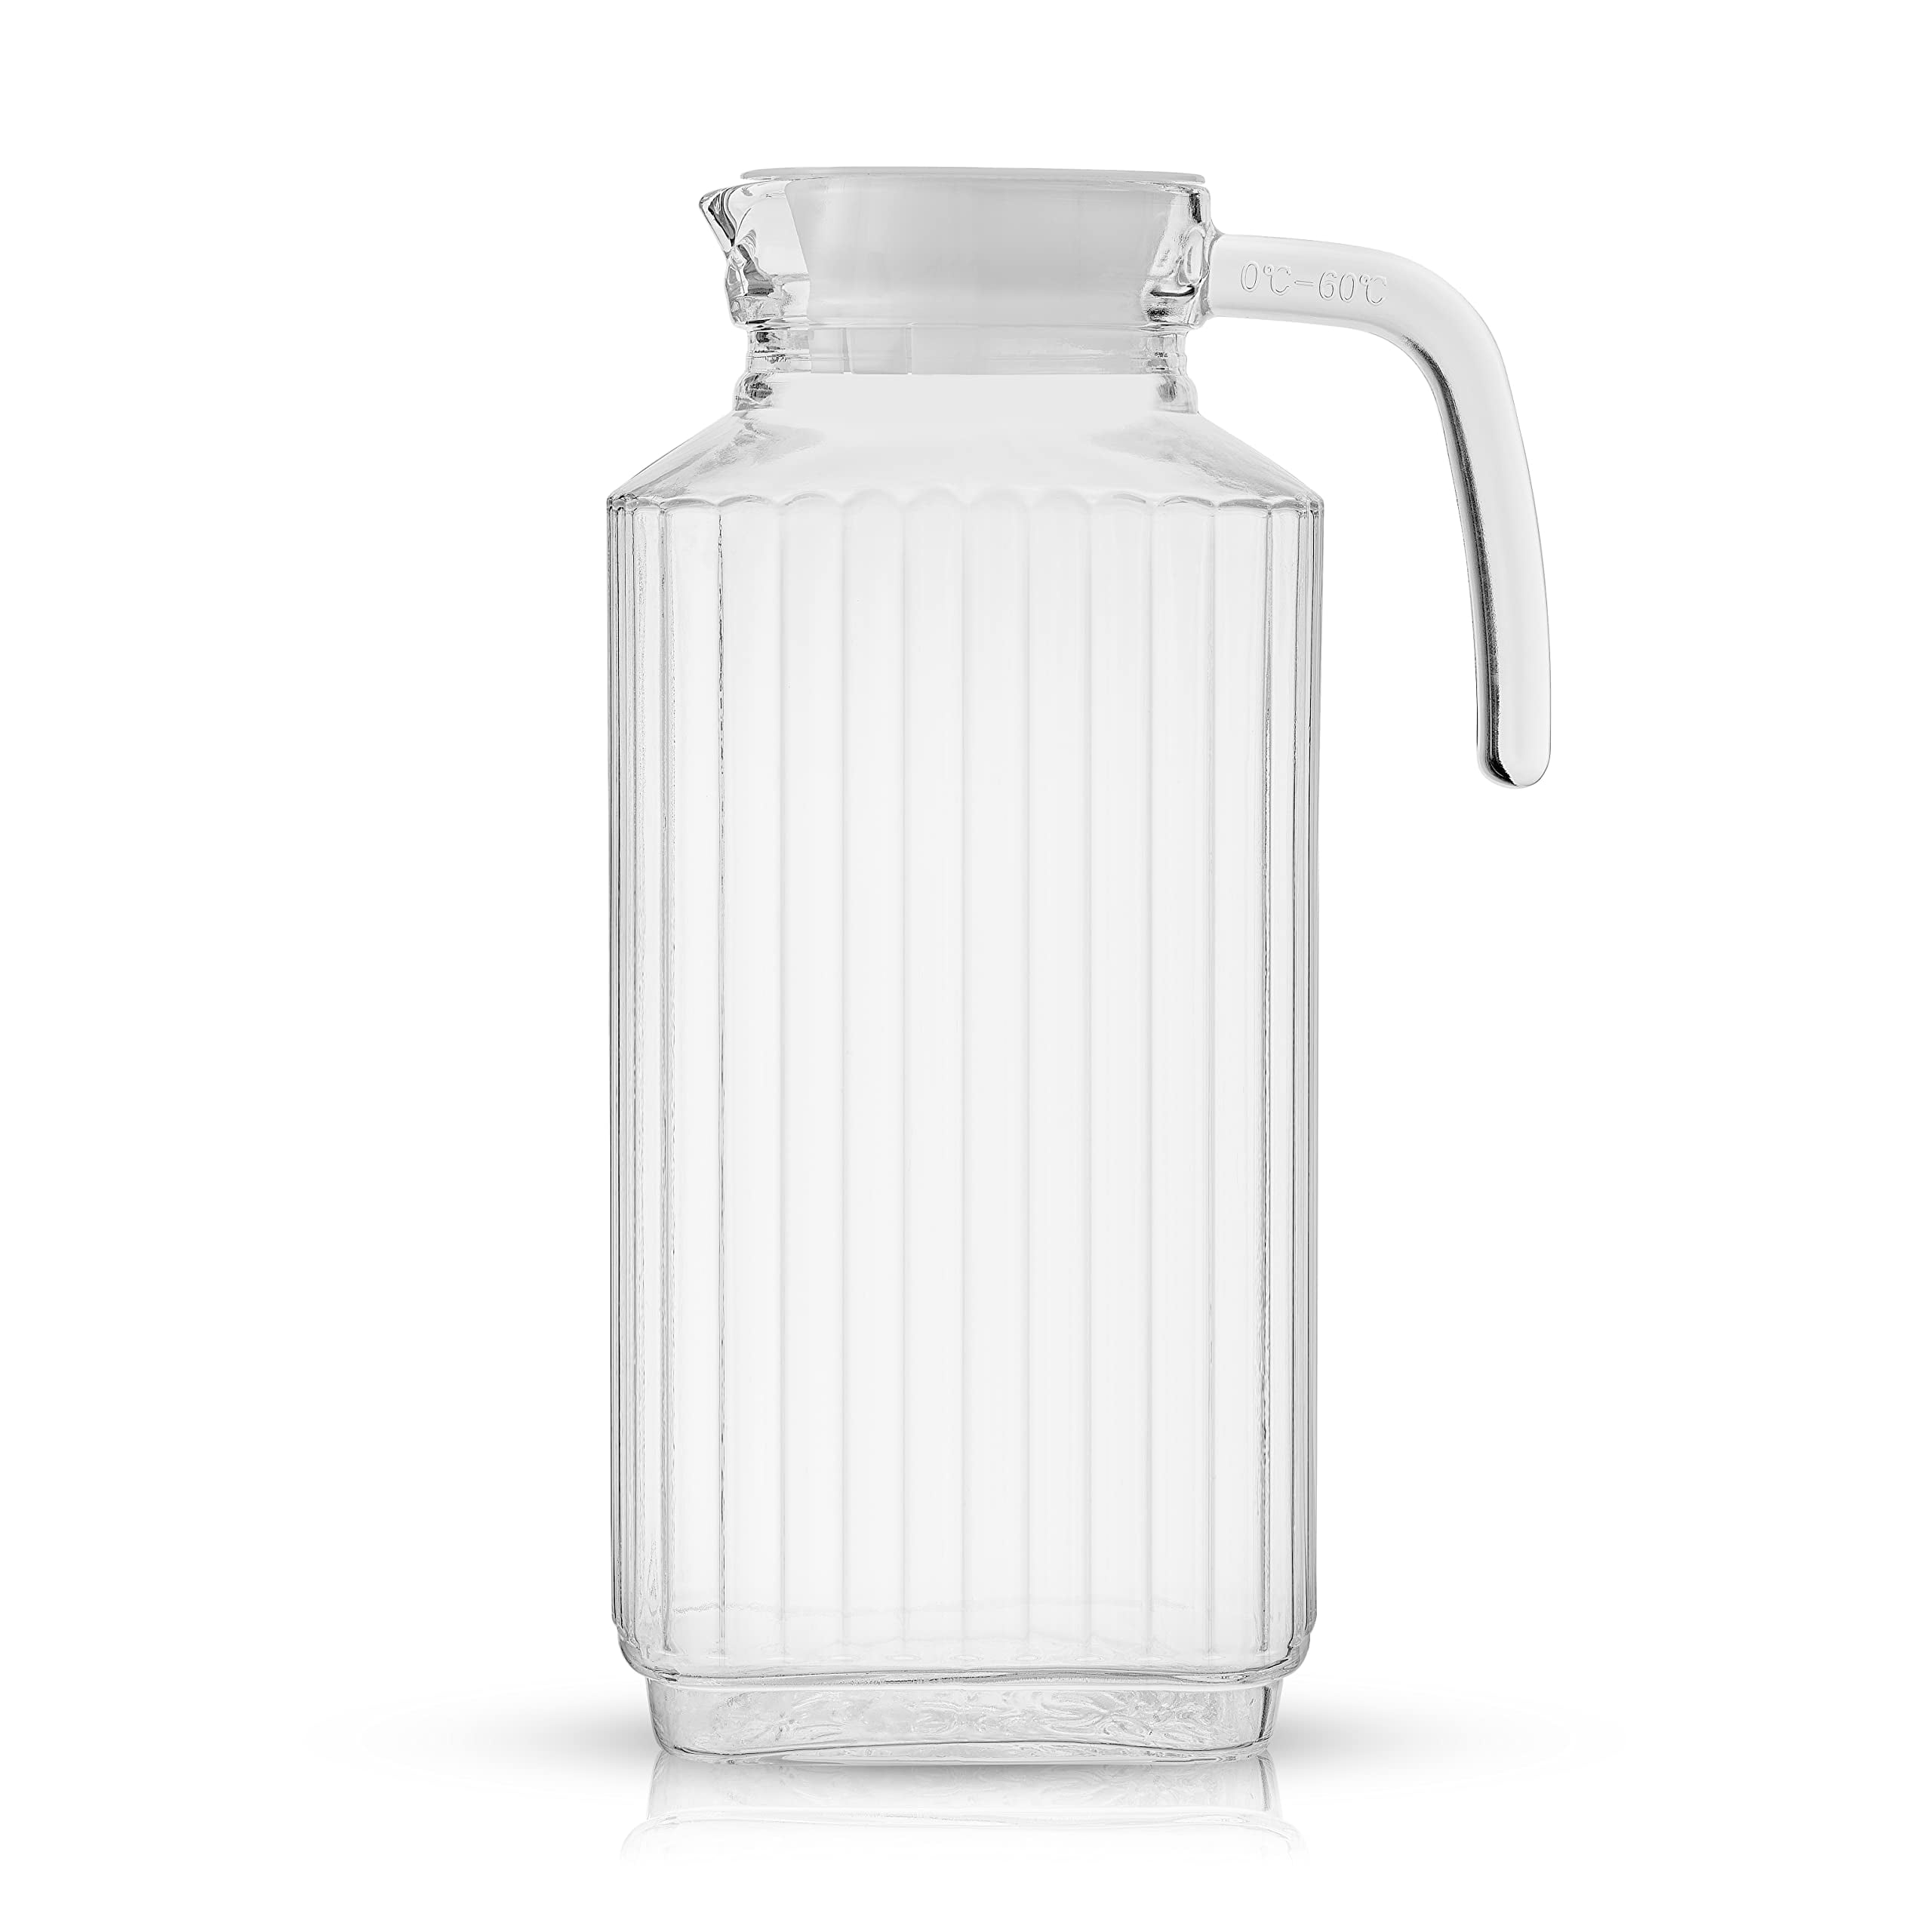  Glass Water Pitcher with Spout – 63 Oz. Elegant Serving Carafe  for Water, For Cocktails, Juice, Water – Clear Glass Beverage Pitcher. :  Home & Kitchen